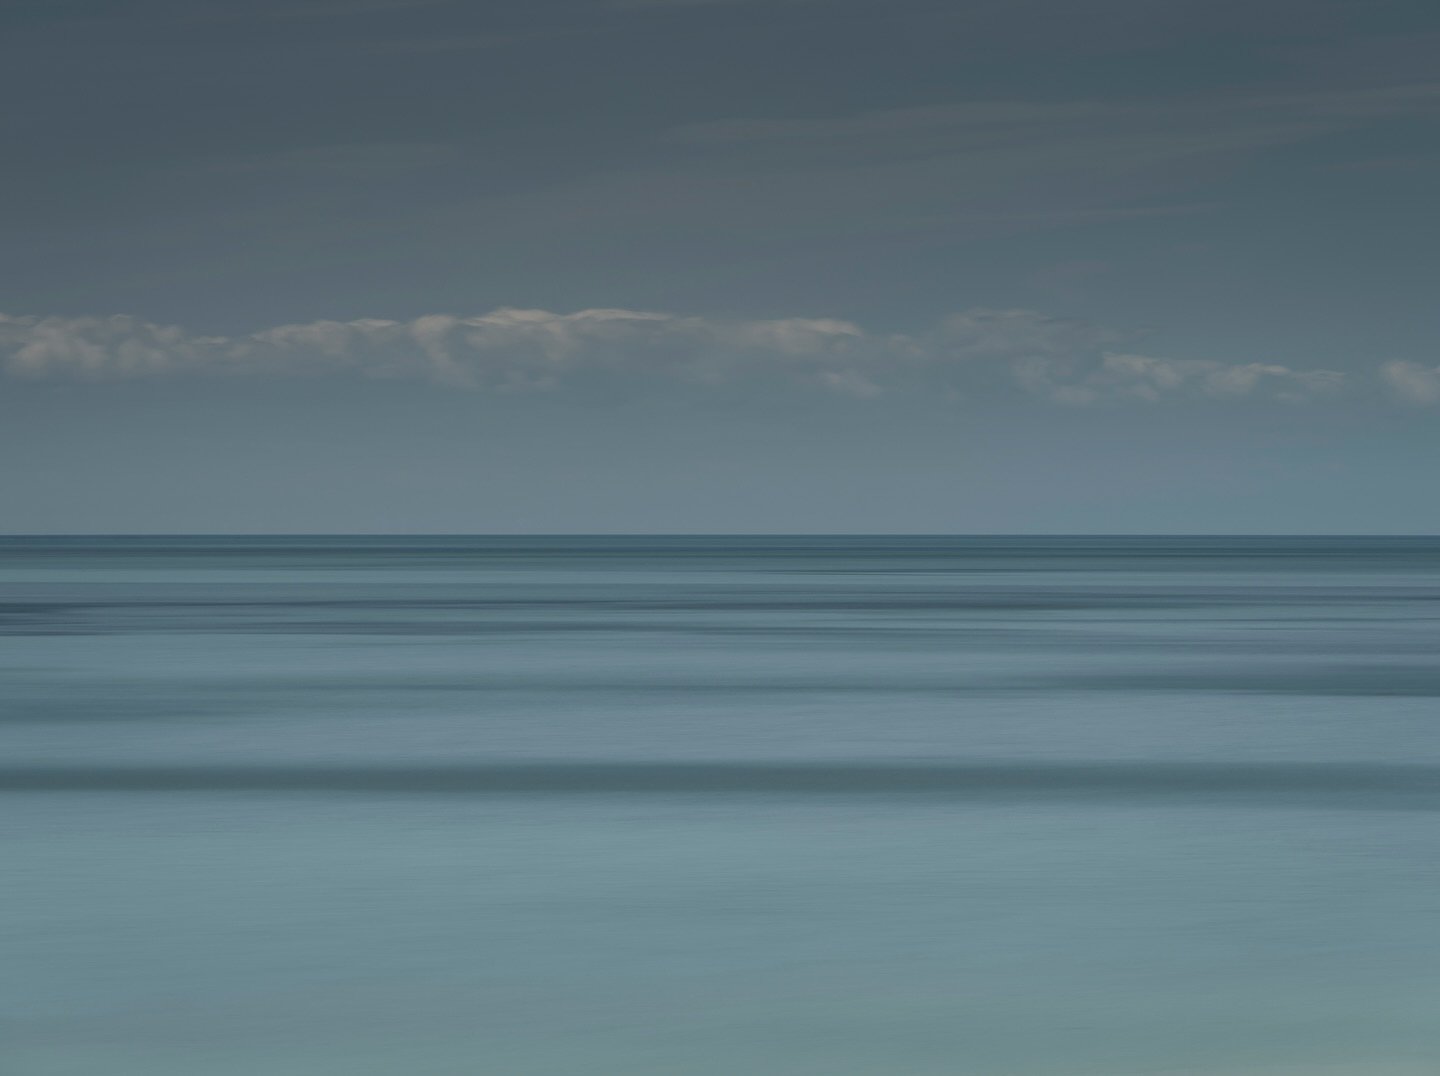 A long exposure photograph from September last year. I could look into it all day.
.
.
.
.
.
.
#longexposure #sea #seascape #bluesea #cloudscape#clouds #horizon #lee100 #bigstopper #fujifilmgfx100s #allthefilters